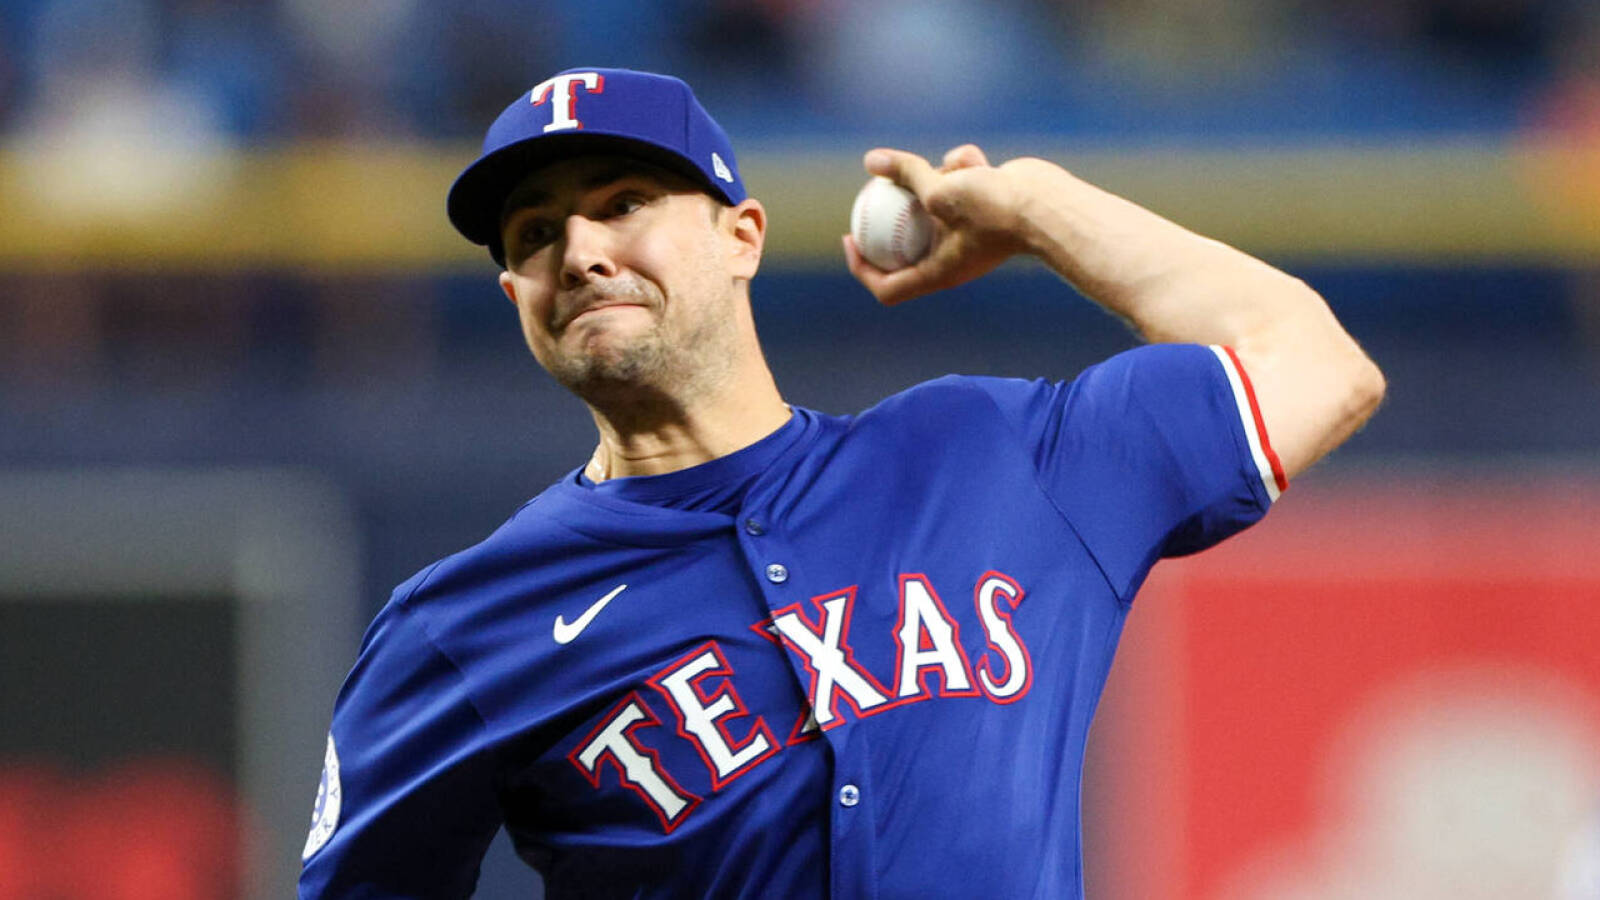 Rangers reliever undergoes surgery for injury suffered when punching a wall